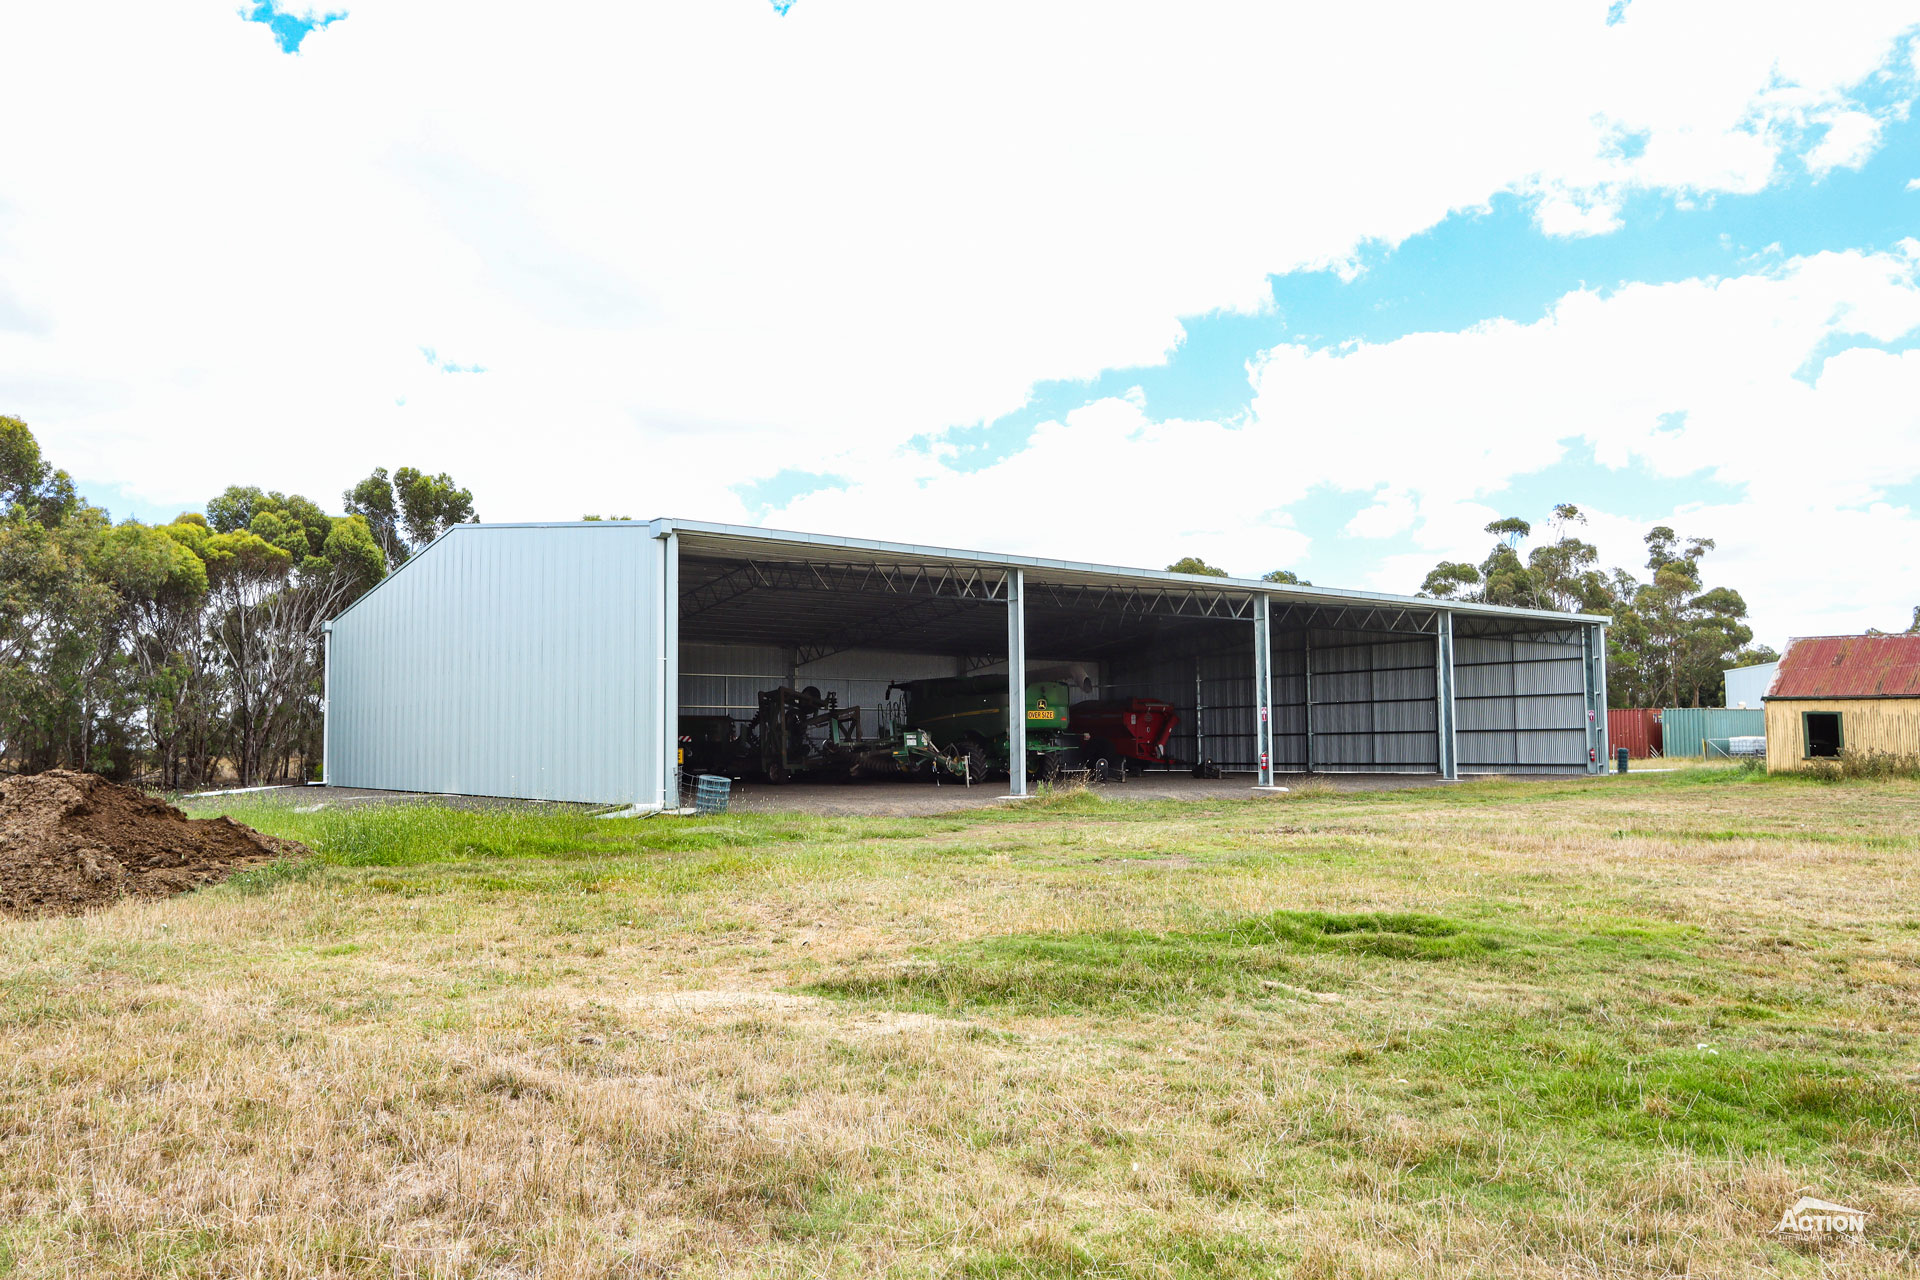 You are currently viewing 40m x 27m x 6m machinery shed